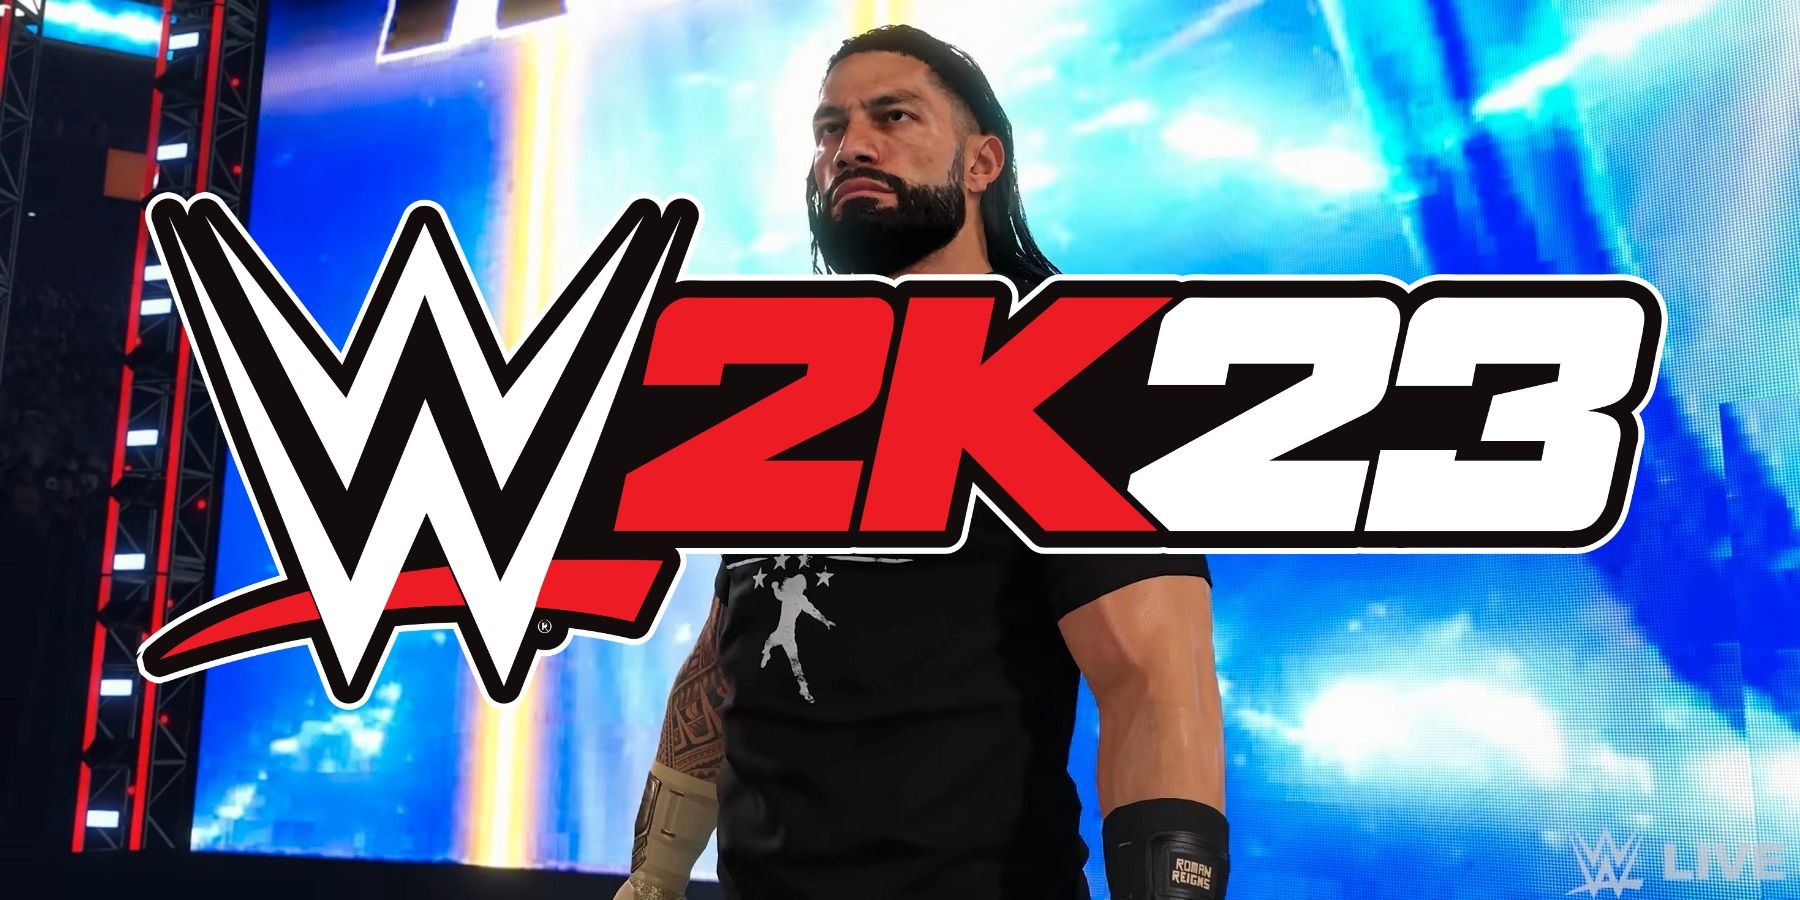 WWE 2K22 Roster Prediction - Who's in and Who's Out?